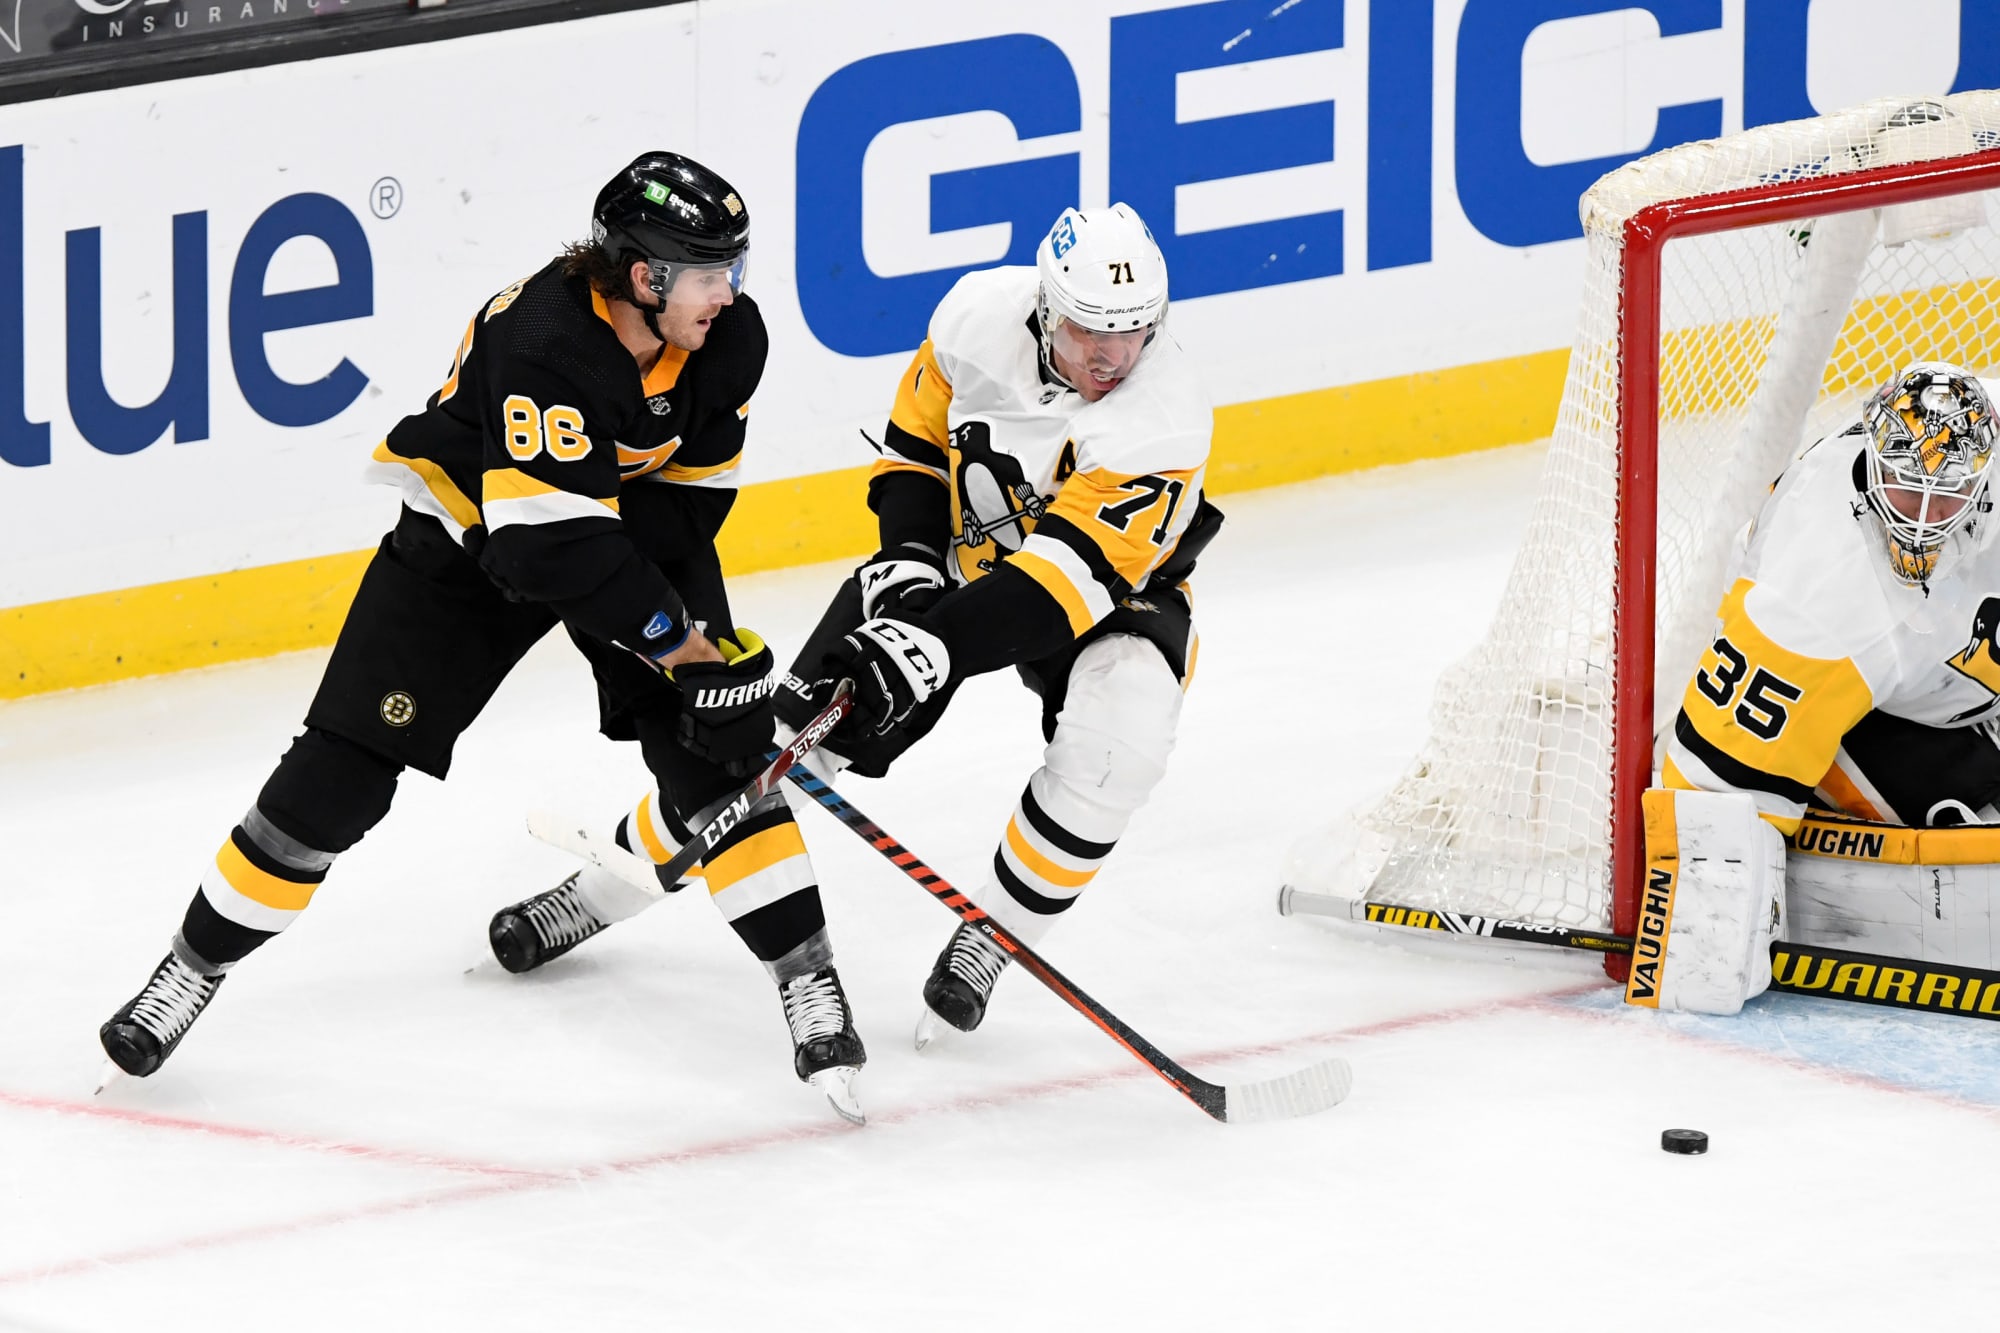 Bruins vs Penguins 1/28/21 Rematch preview, lineups, and more